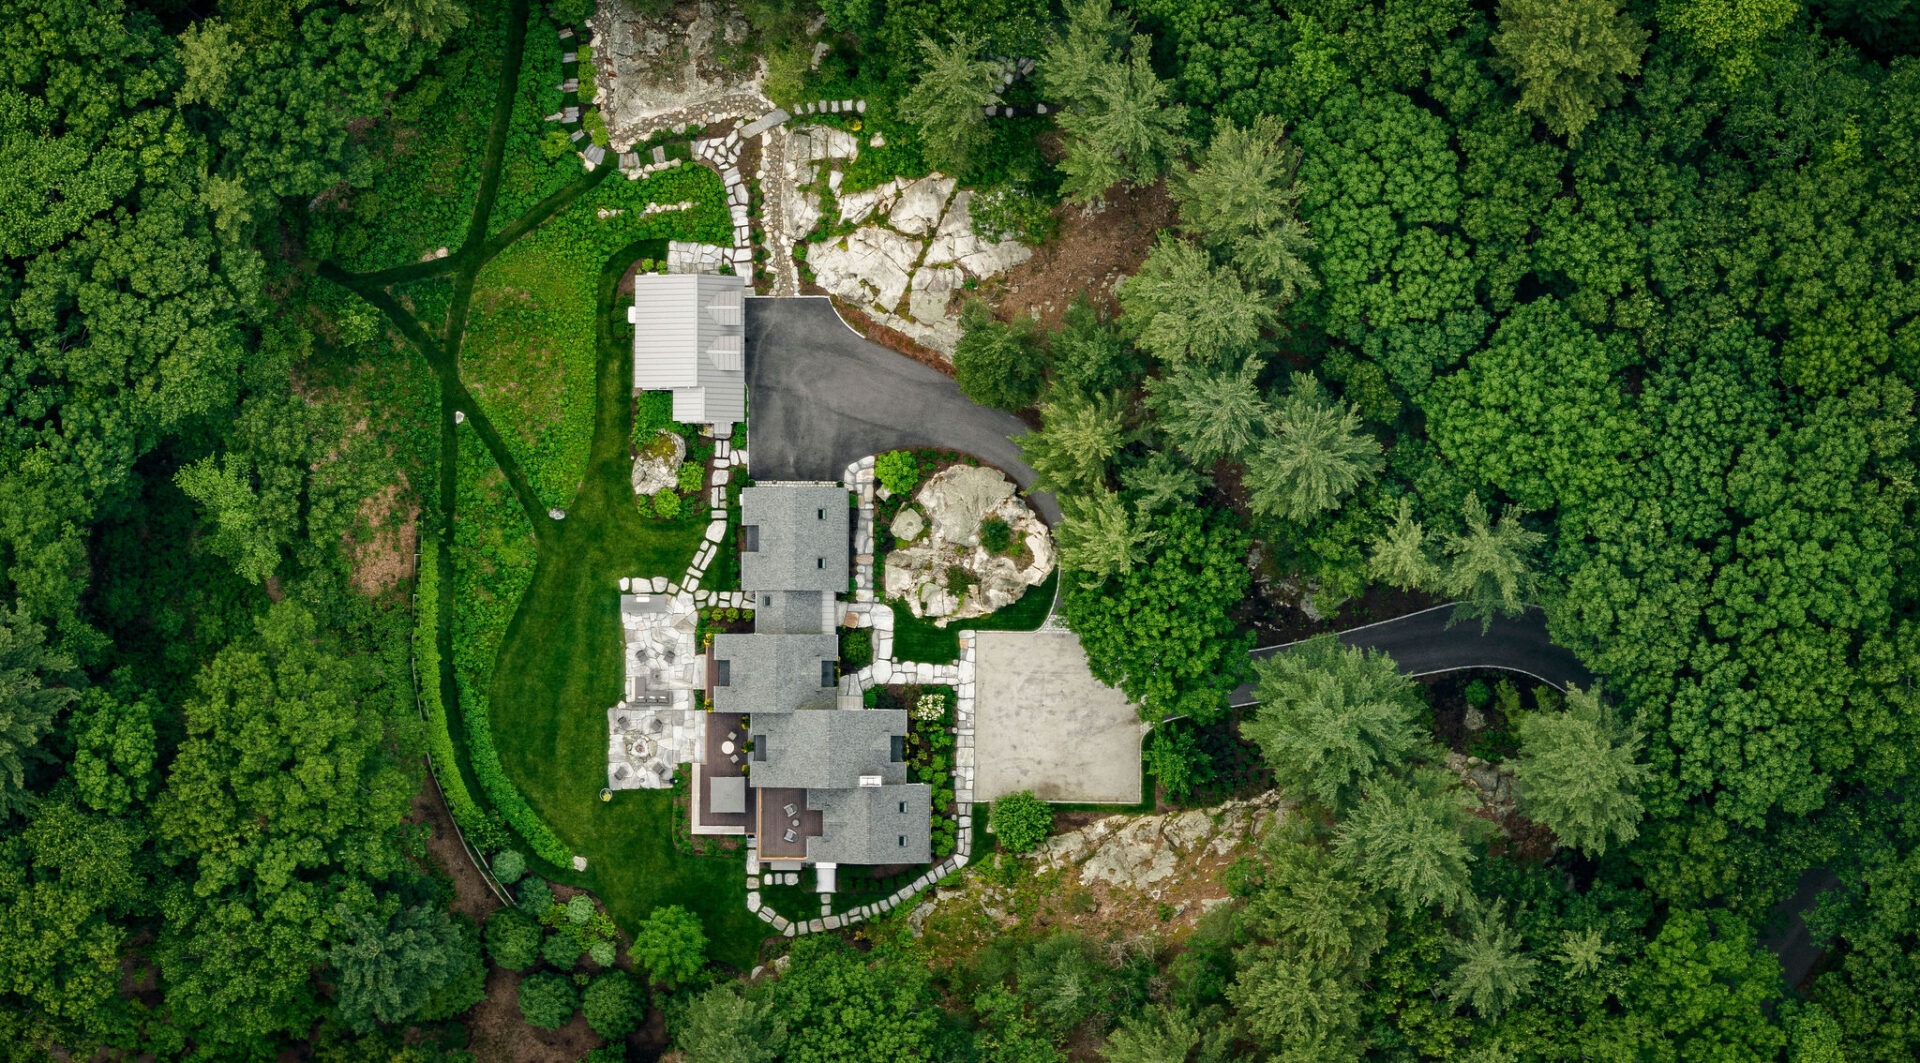 Aerial view of a large estate with multiple roofs, surrounded by lush greenery, with winding pathways and a driveway cutting through the landscape.